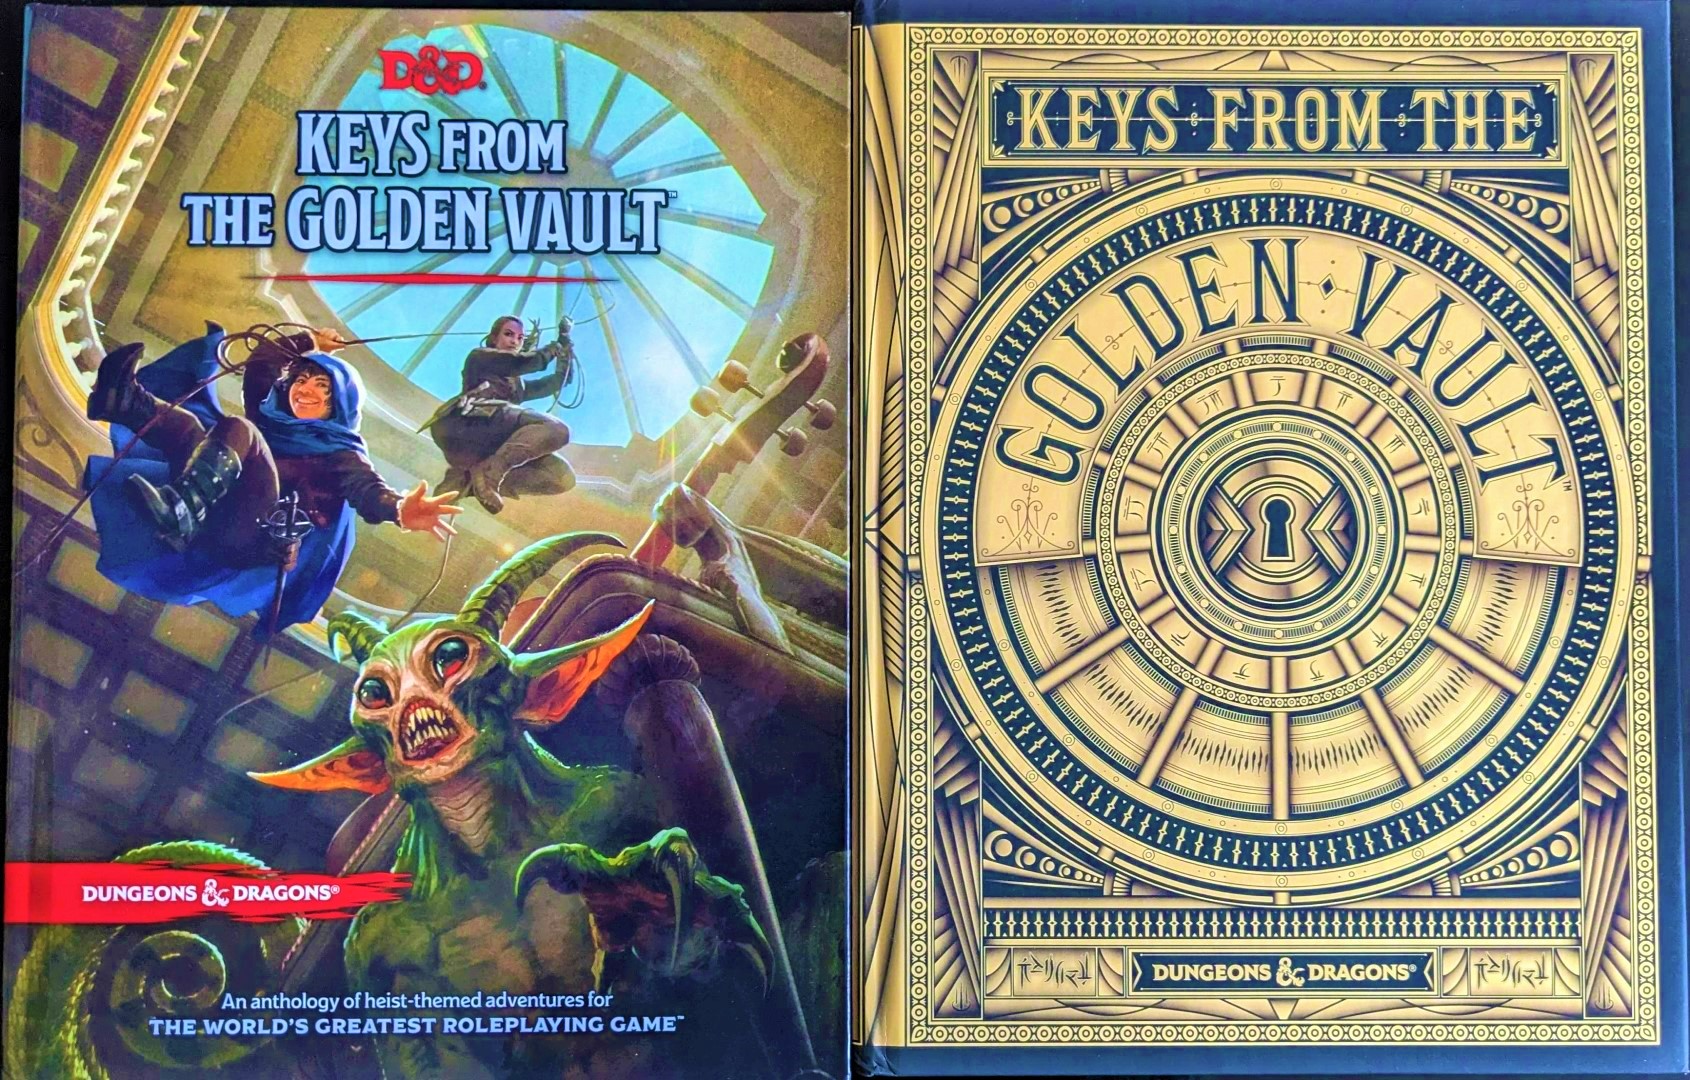 DnD Keys from the Golden Vault review copies, showing the books' two variant covers